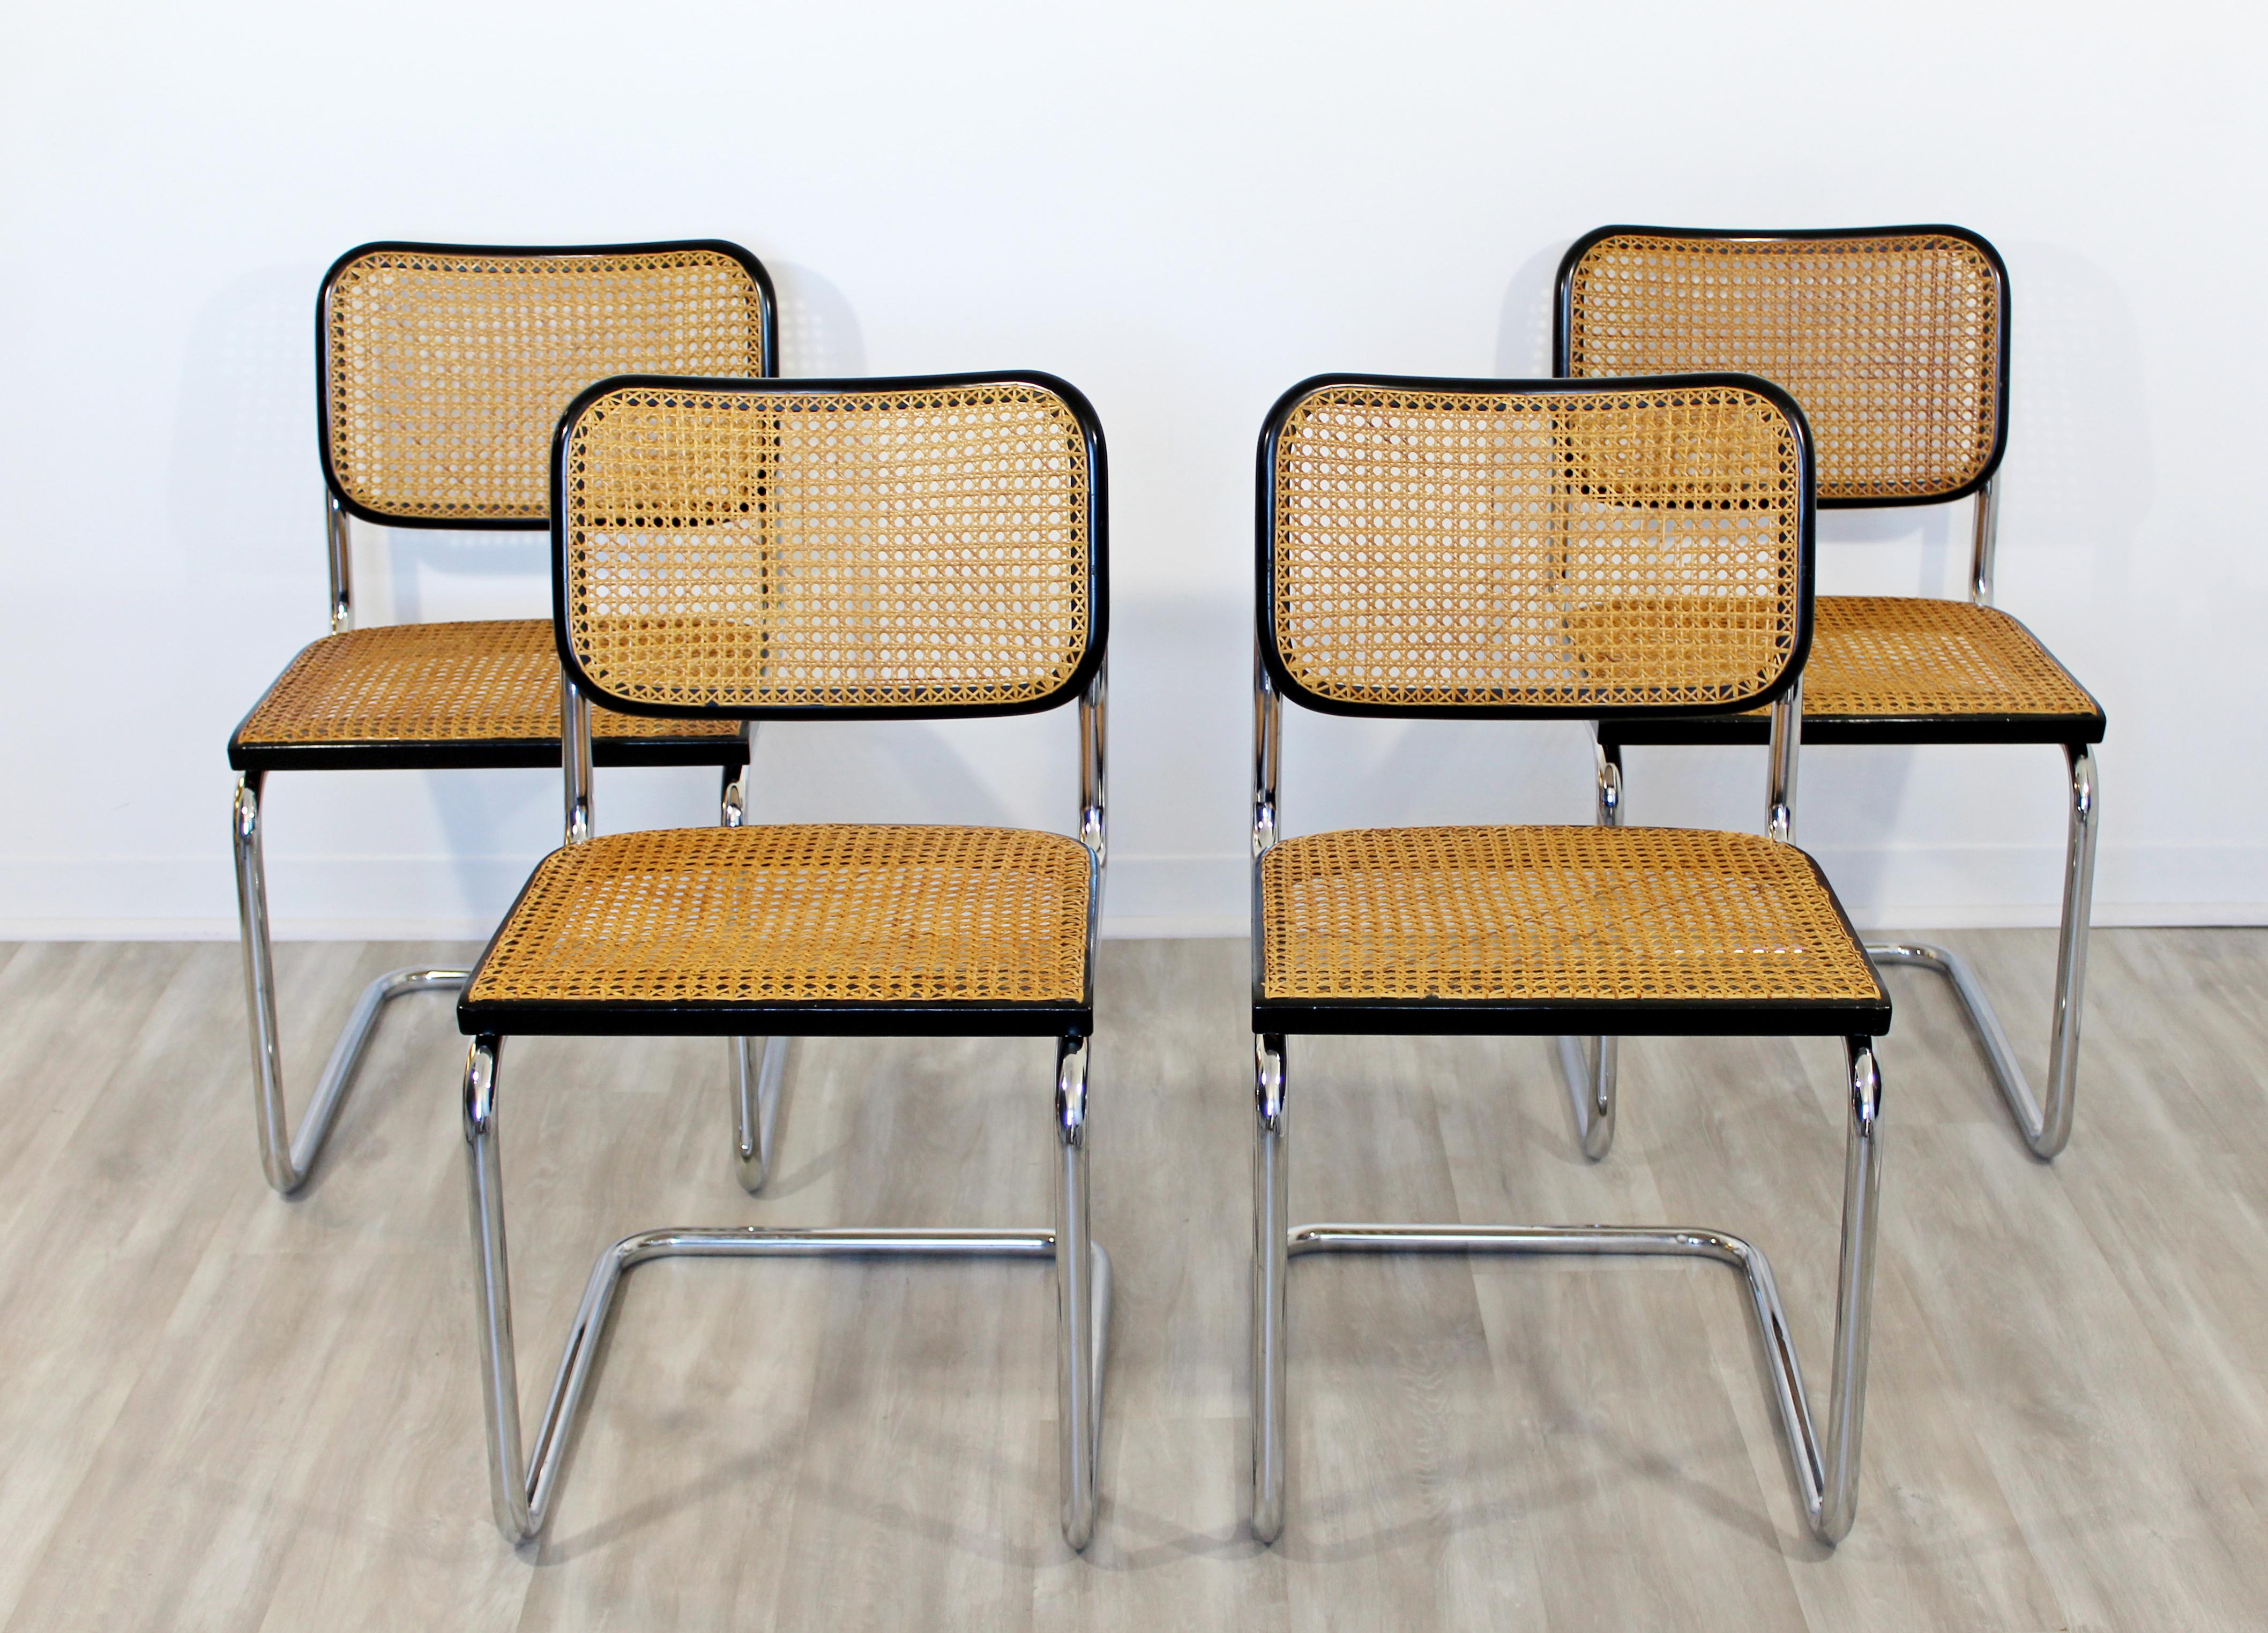 For your consideration is a gorgeous set of four side dining chairs, made of cantilevered chrome and black lacquered wood, with cane, by Marcel Breuer for Knoll, circa 1970s. In excellent vintage condition. The dimensions are 18